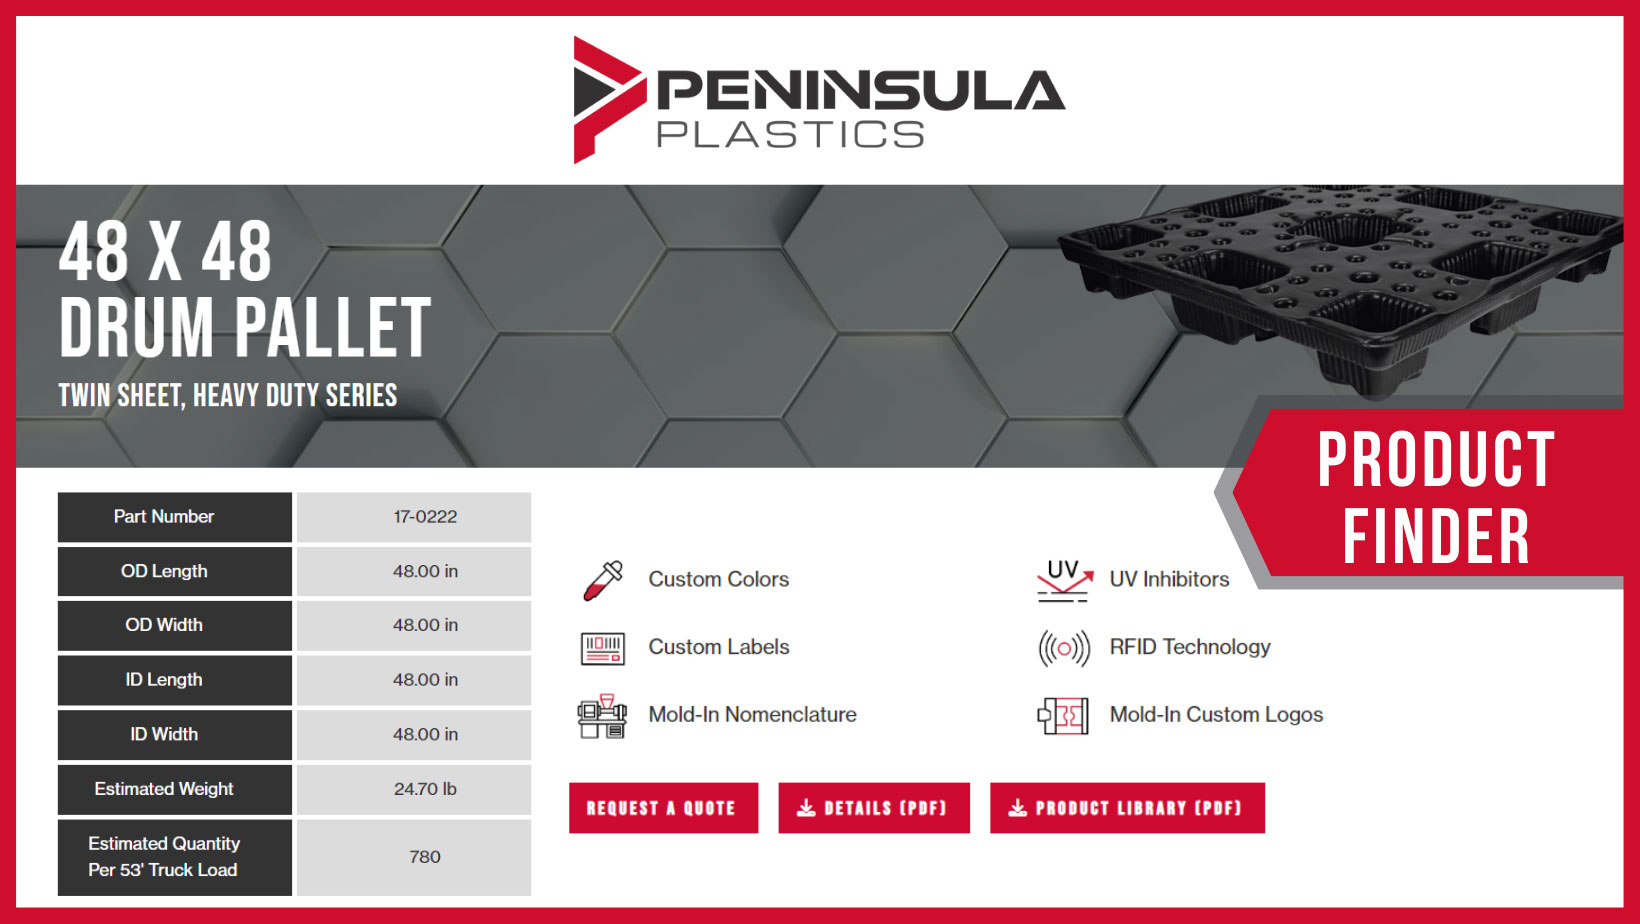 Preview of the Peninsula Plastics Pallet Library